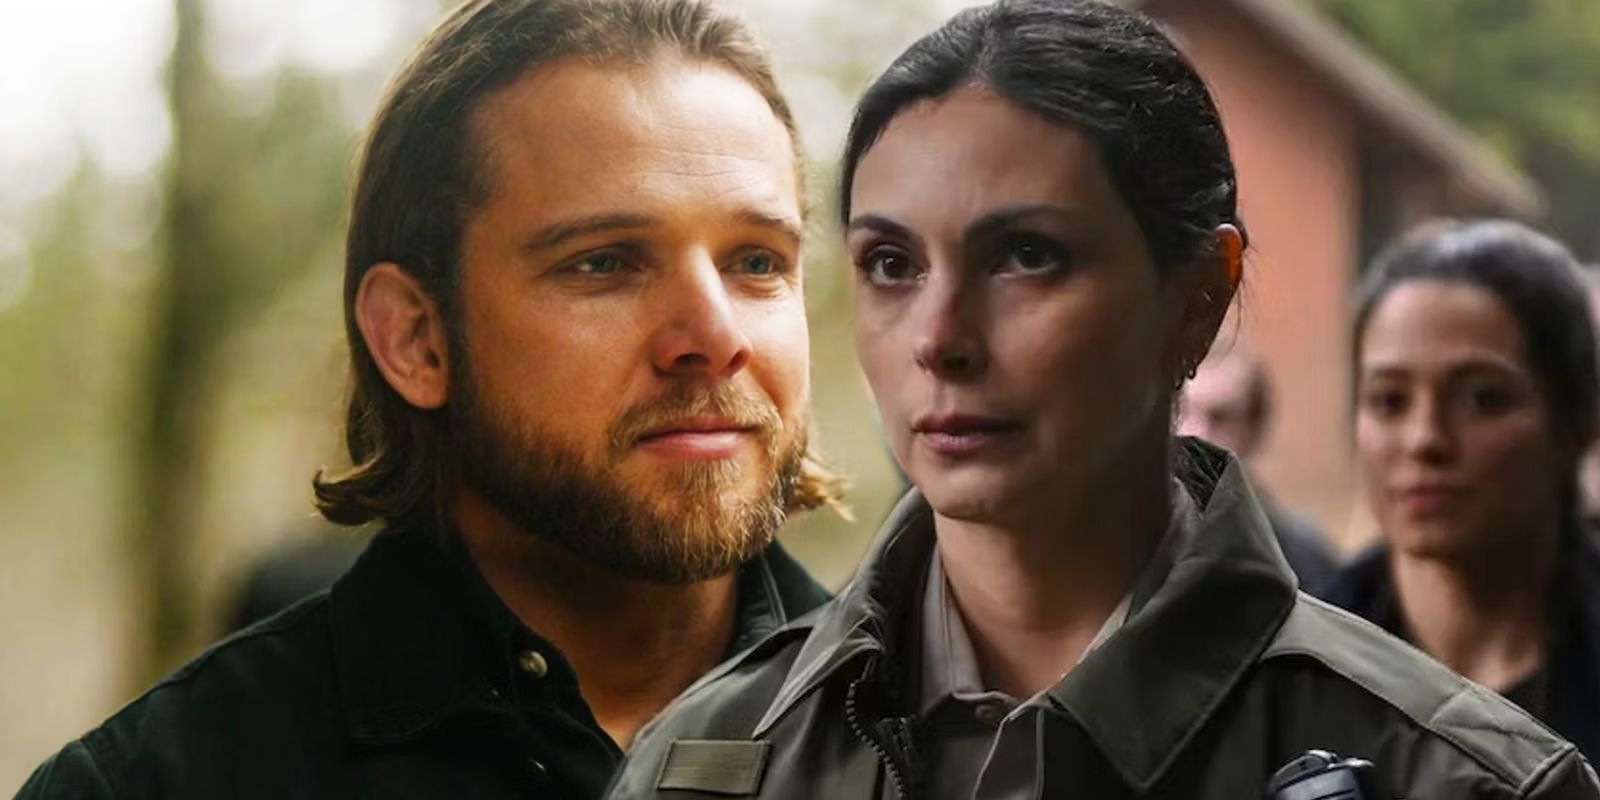 Max Thieriot as Bode Leone smiling next to Morena Baccarin as Sheriff Mickey looking serious in Fire Country season 2